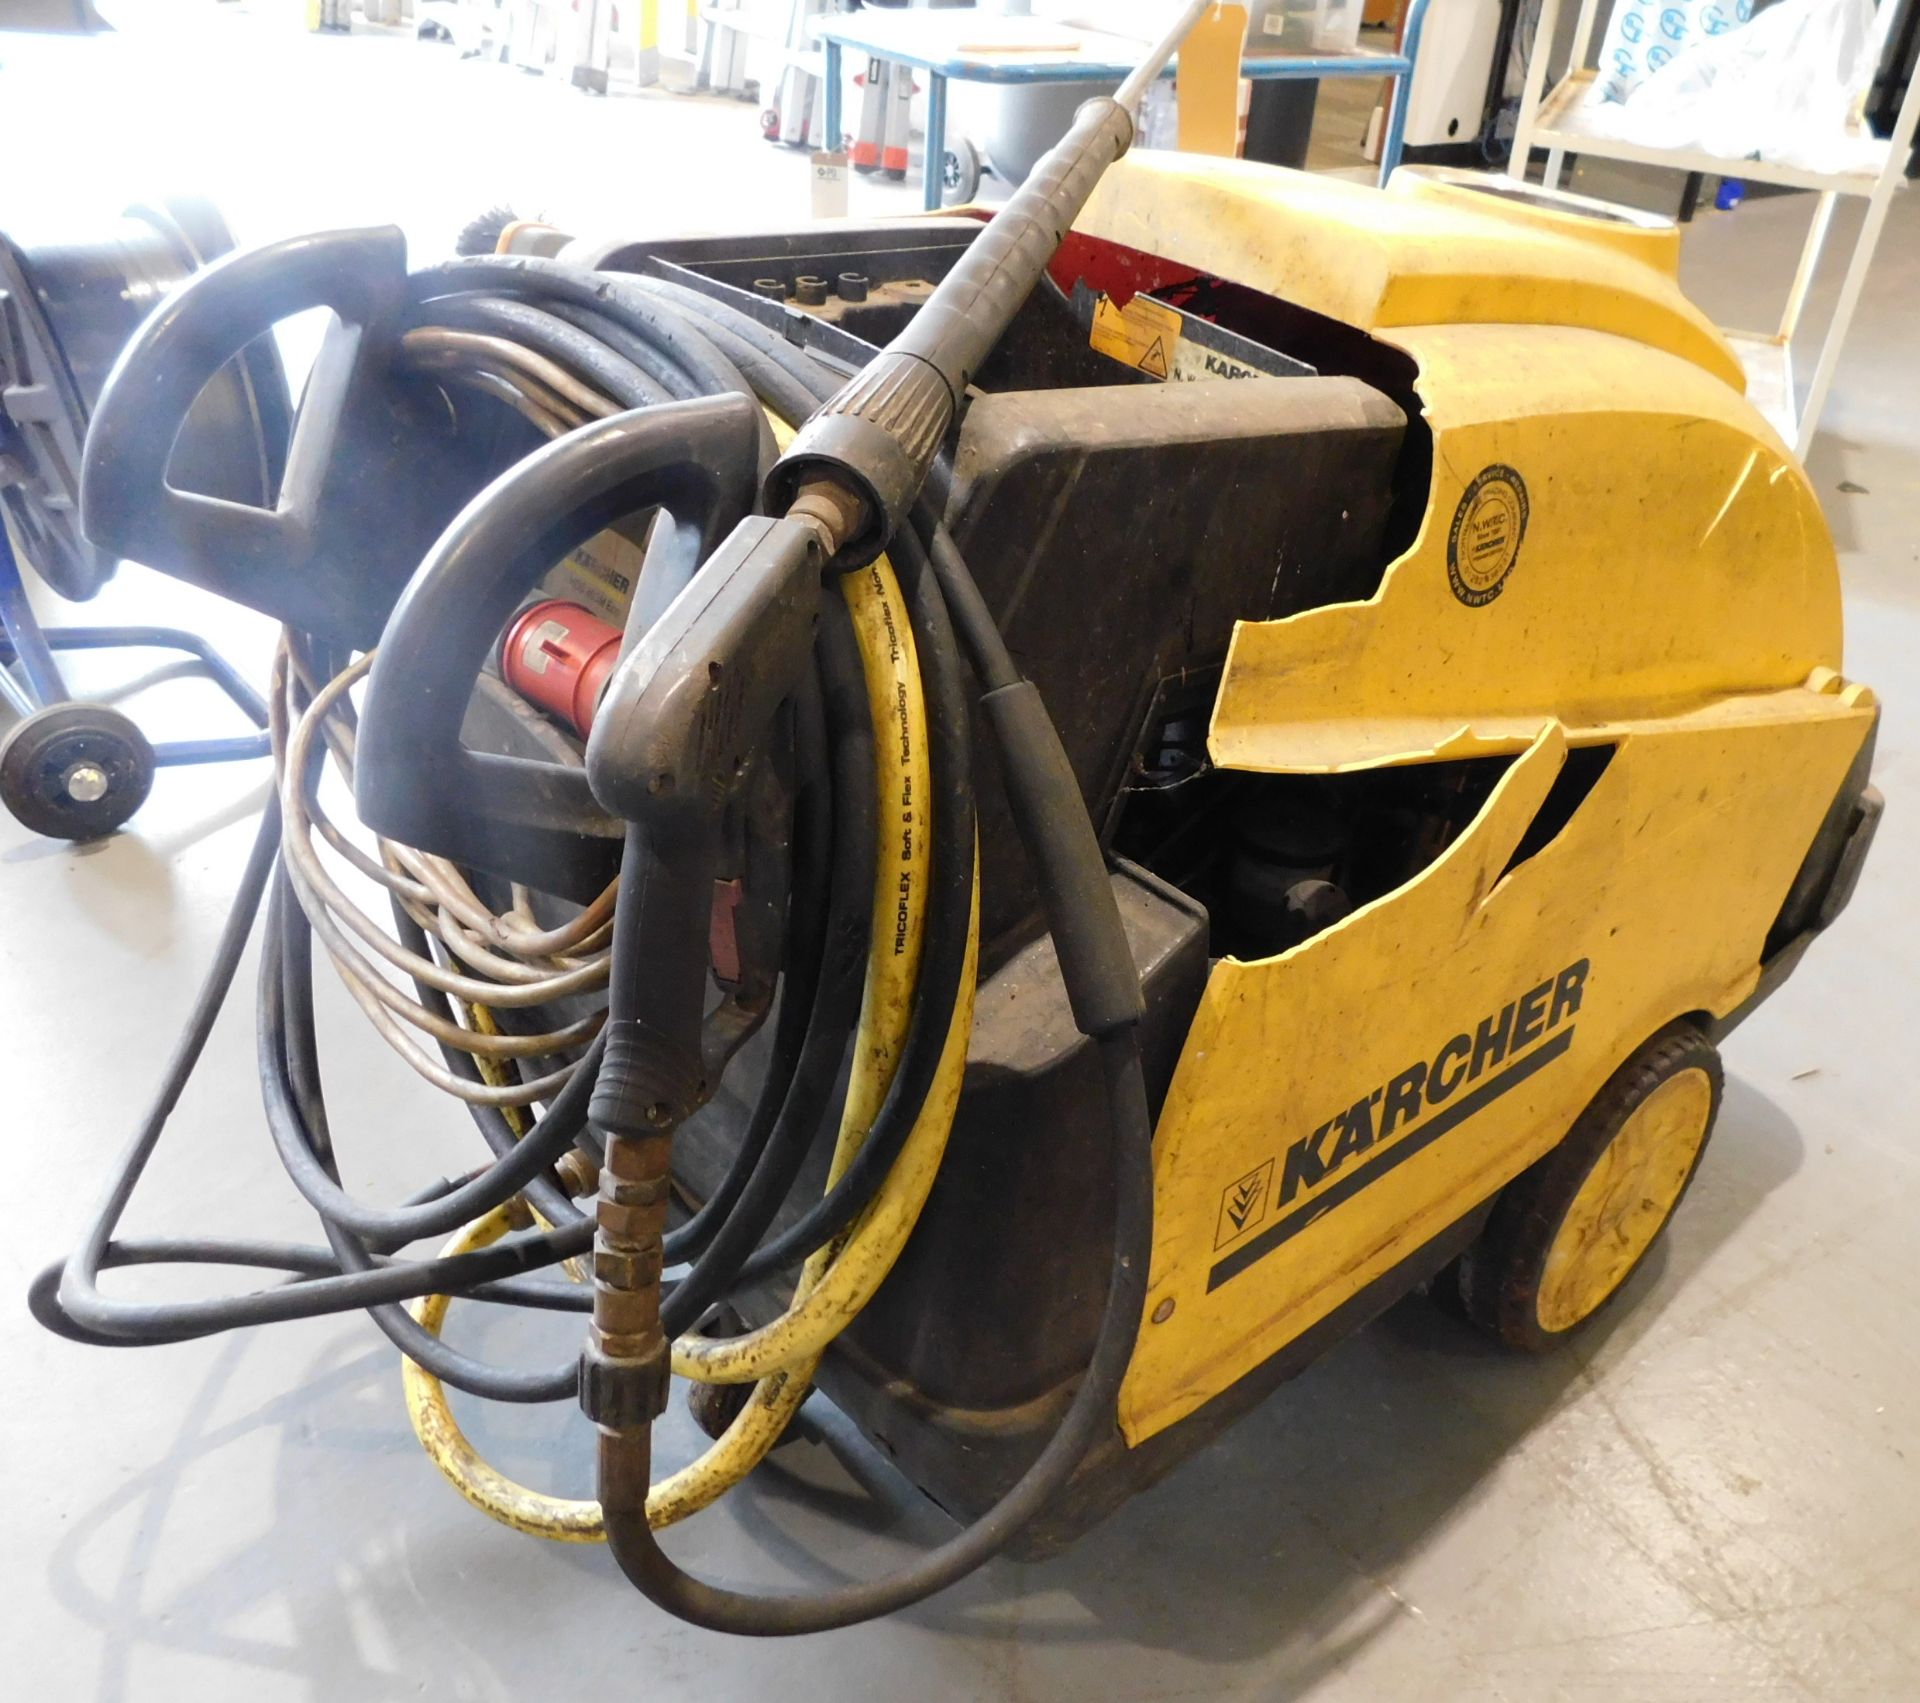 Karcher HDS895M Eco 32amp Pressure Washer (Located Rugby. Please Refer to General Notes) - Image 3 of 6